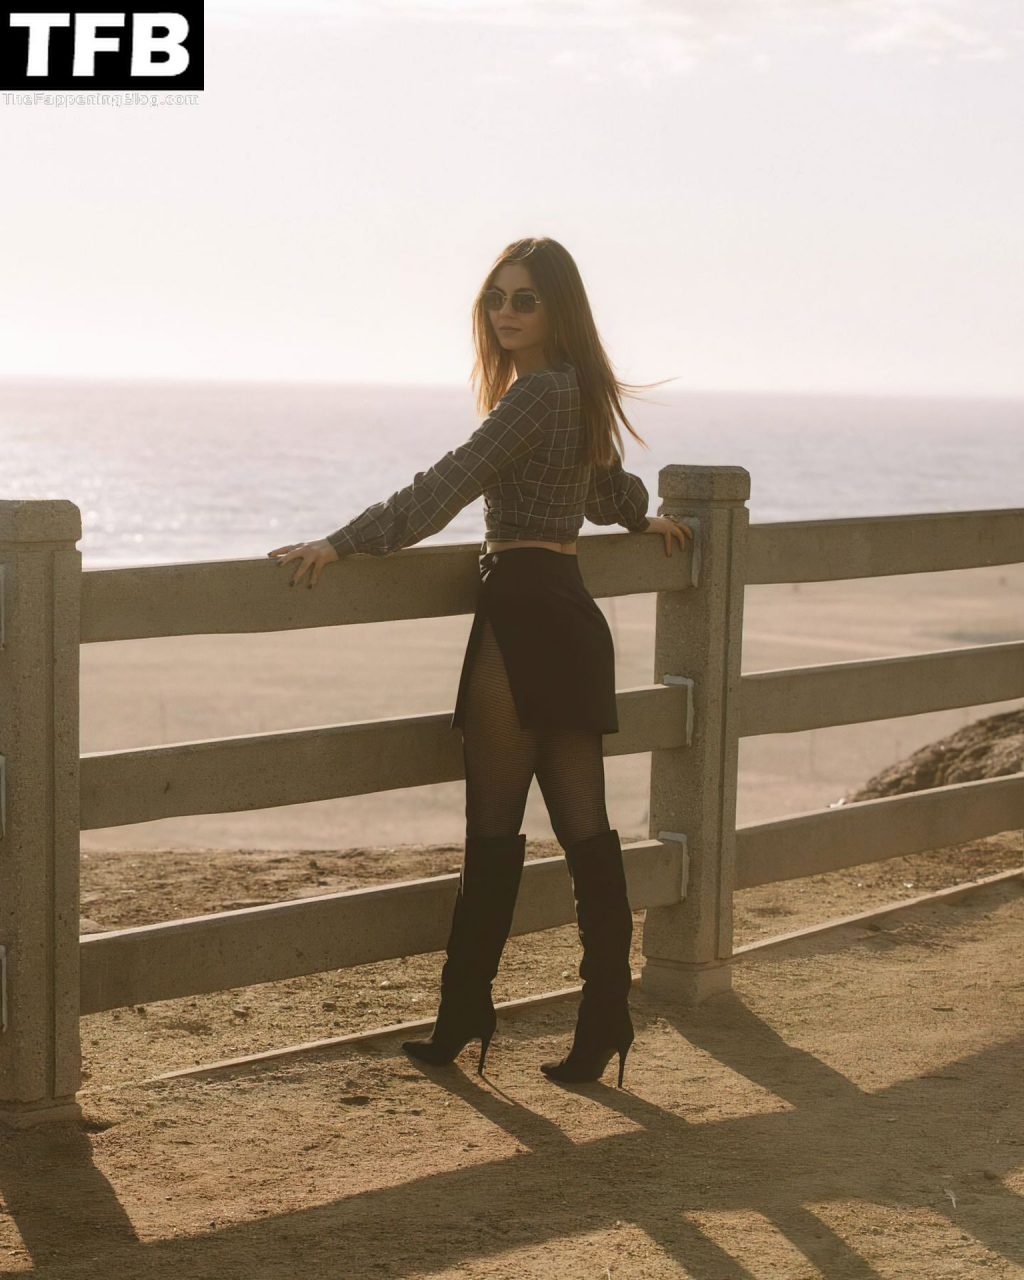 Victoria Justice Poses in Boots and Stockings in a New Shoot by Ned Simes (12 Photos)